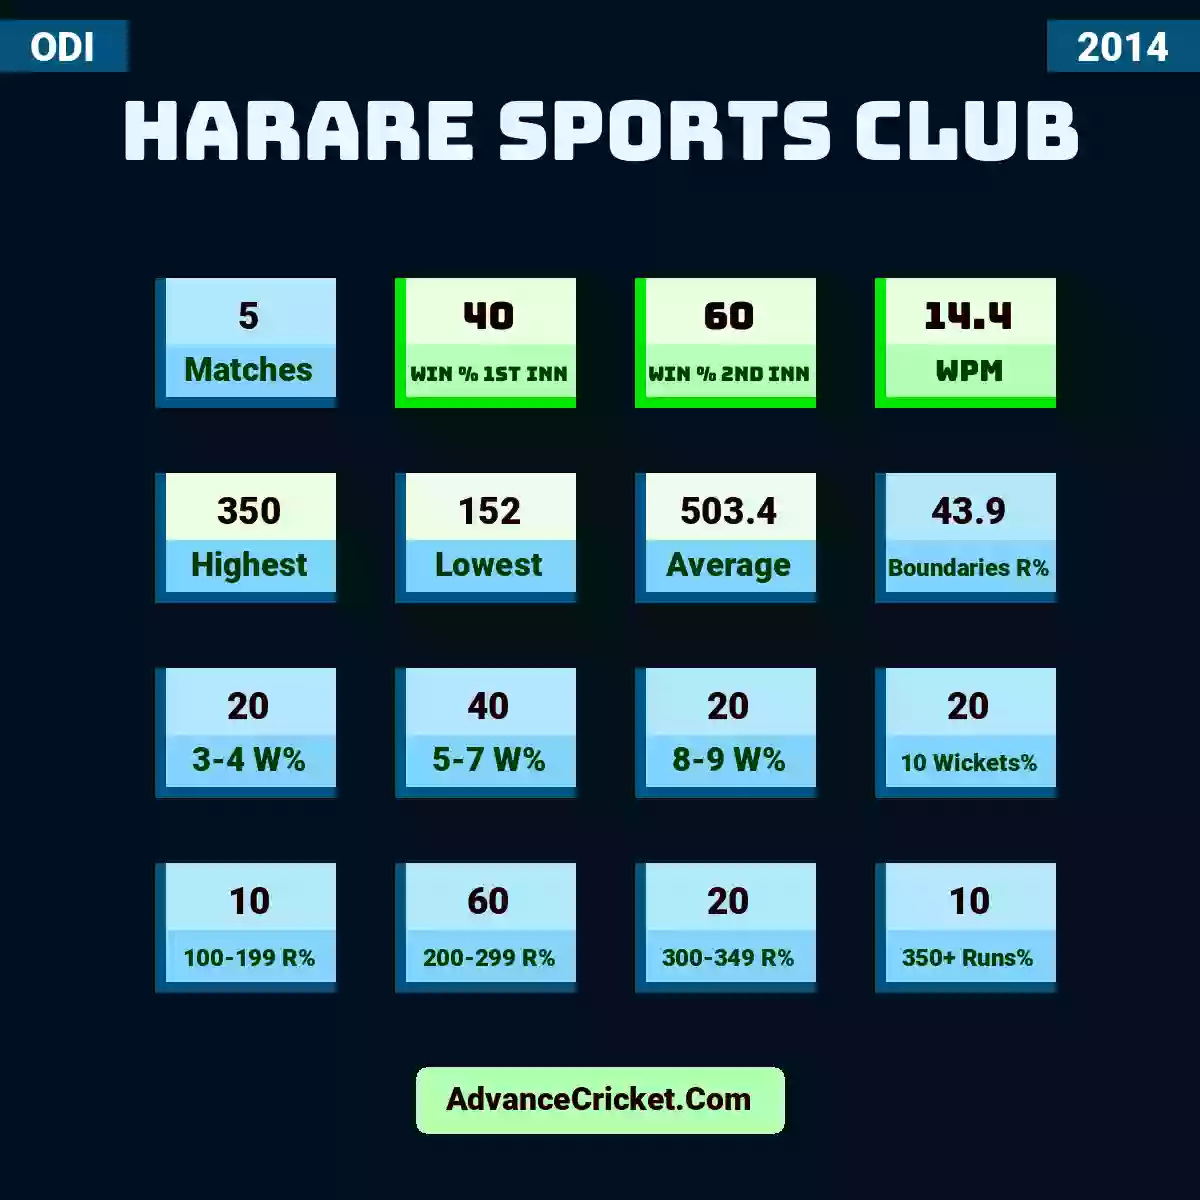 Image showing Harare Sports Club with Matches: 5, Win % 1st Inn: 40, Win % 2nd Inn: 60, WPM: 14.4, Highest: 350, Lowest: 152, Average: 503.4, Boundaries R%: 43.9, 3-4 W%: 20, 5-7 W%: 40, 8-9 W%: 20, 10 Wickets%: 20, 100-199 R%: 10, 200-299 R%: 60, 300-349 R%: 20, 350+ Runs%: 10.